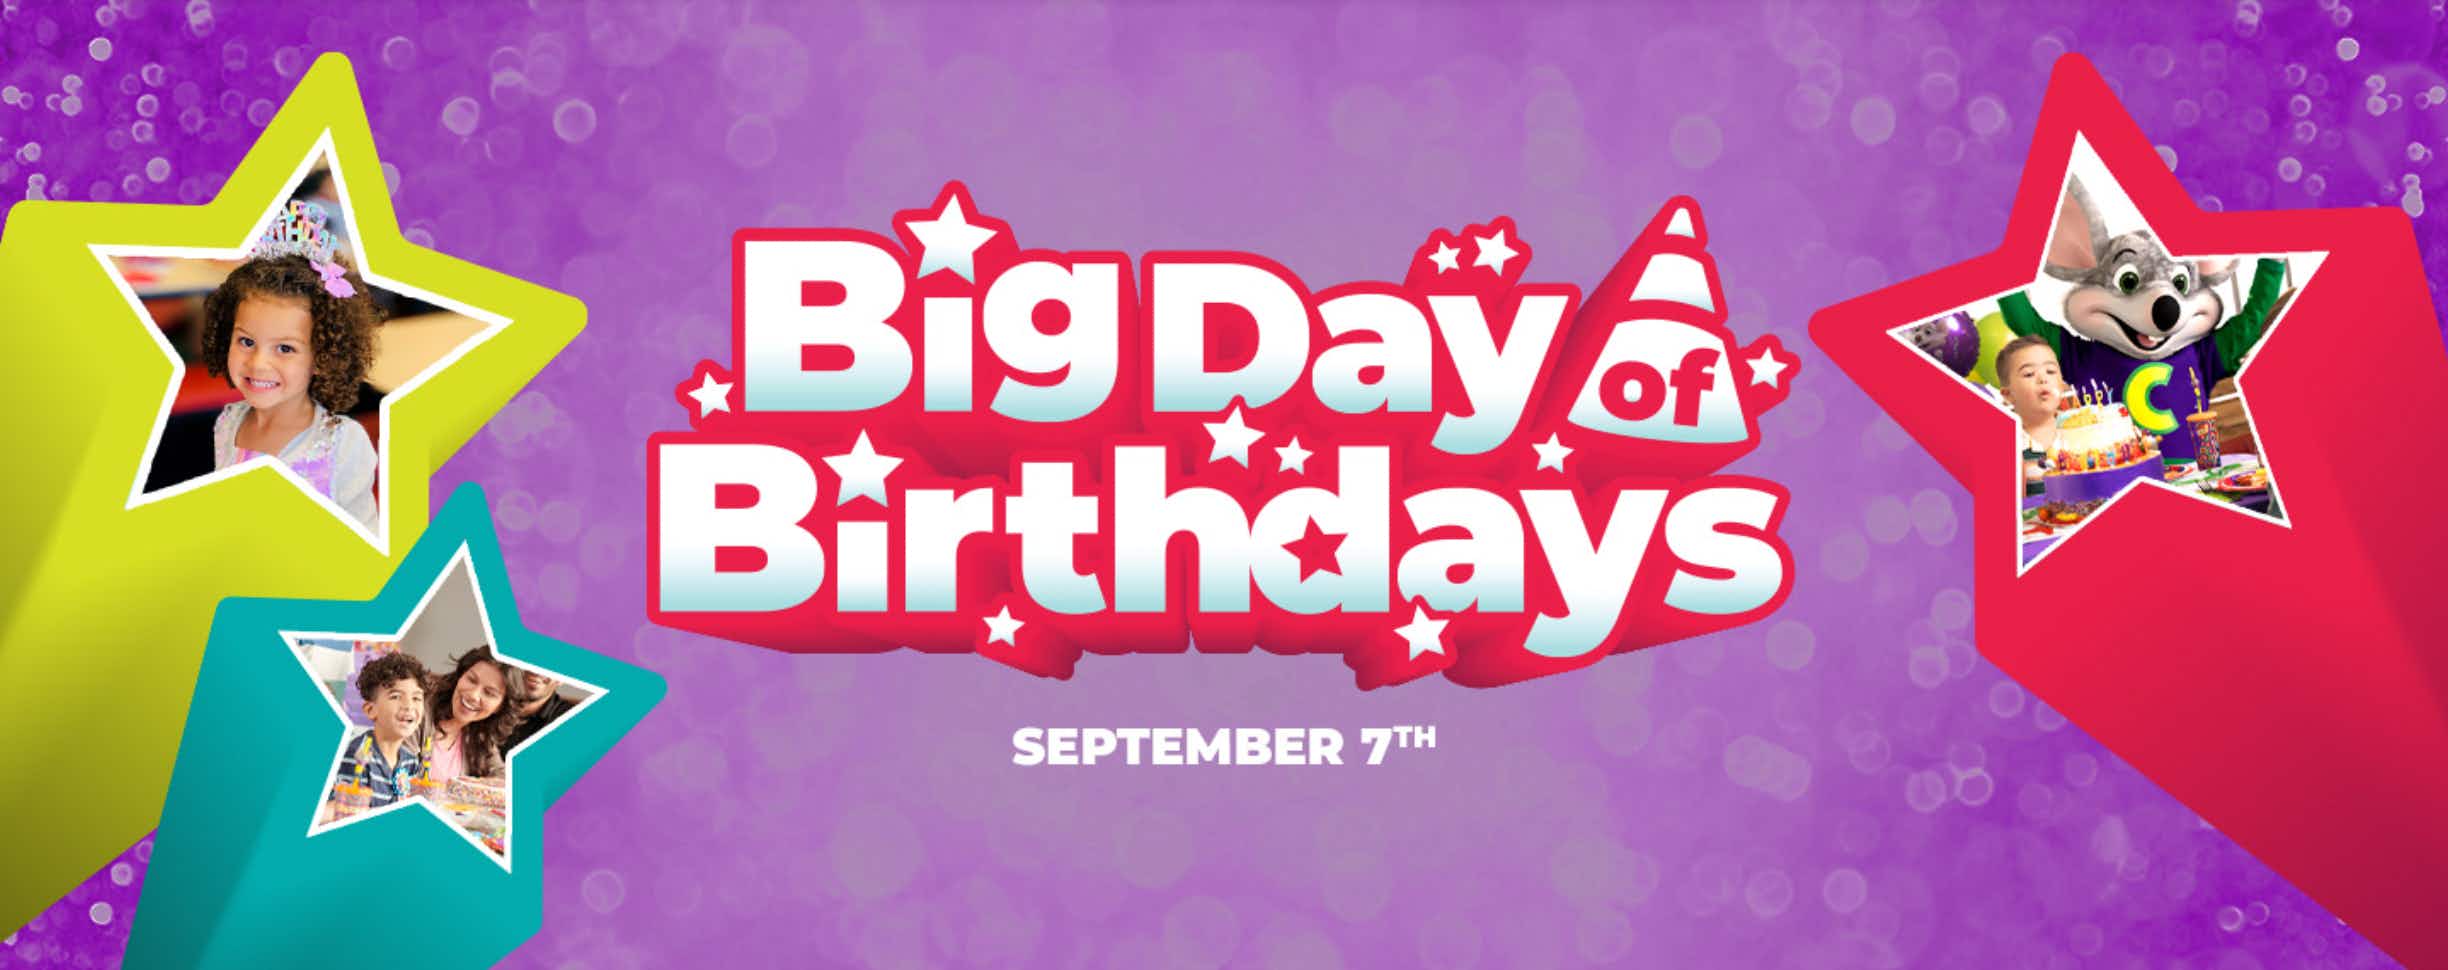 Graphic advertising Chuck E Cheese's Big Day of Birthdays on Sept. 7